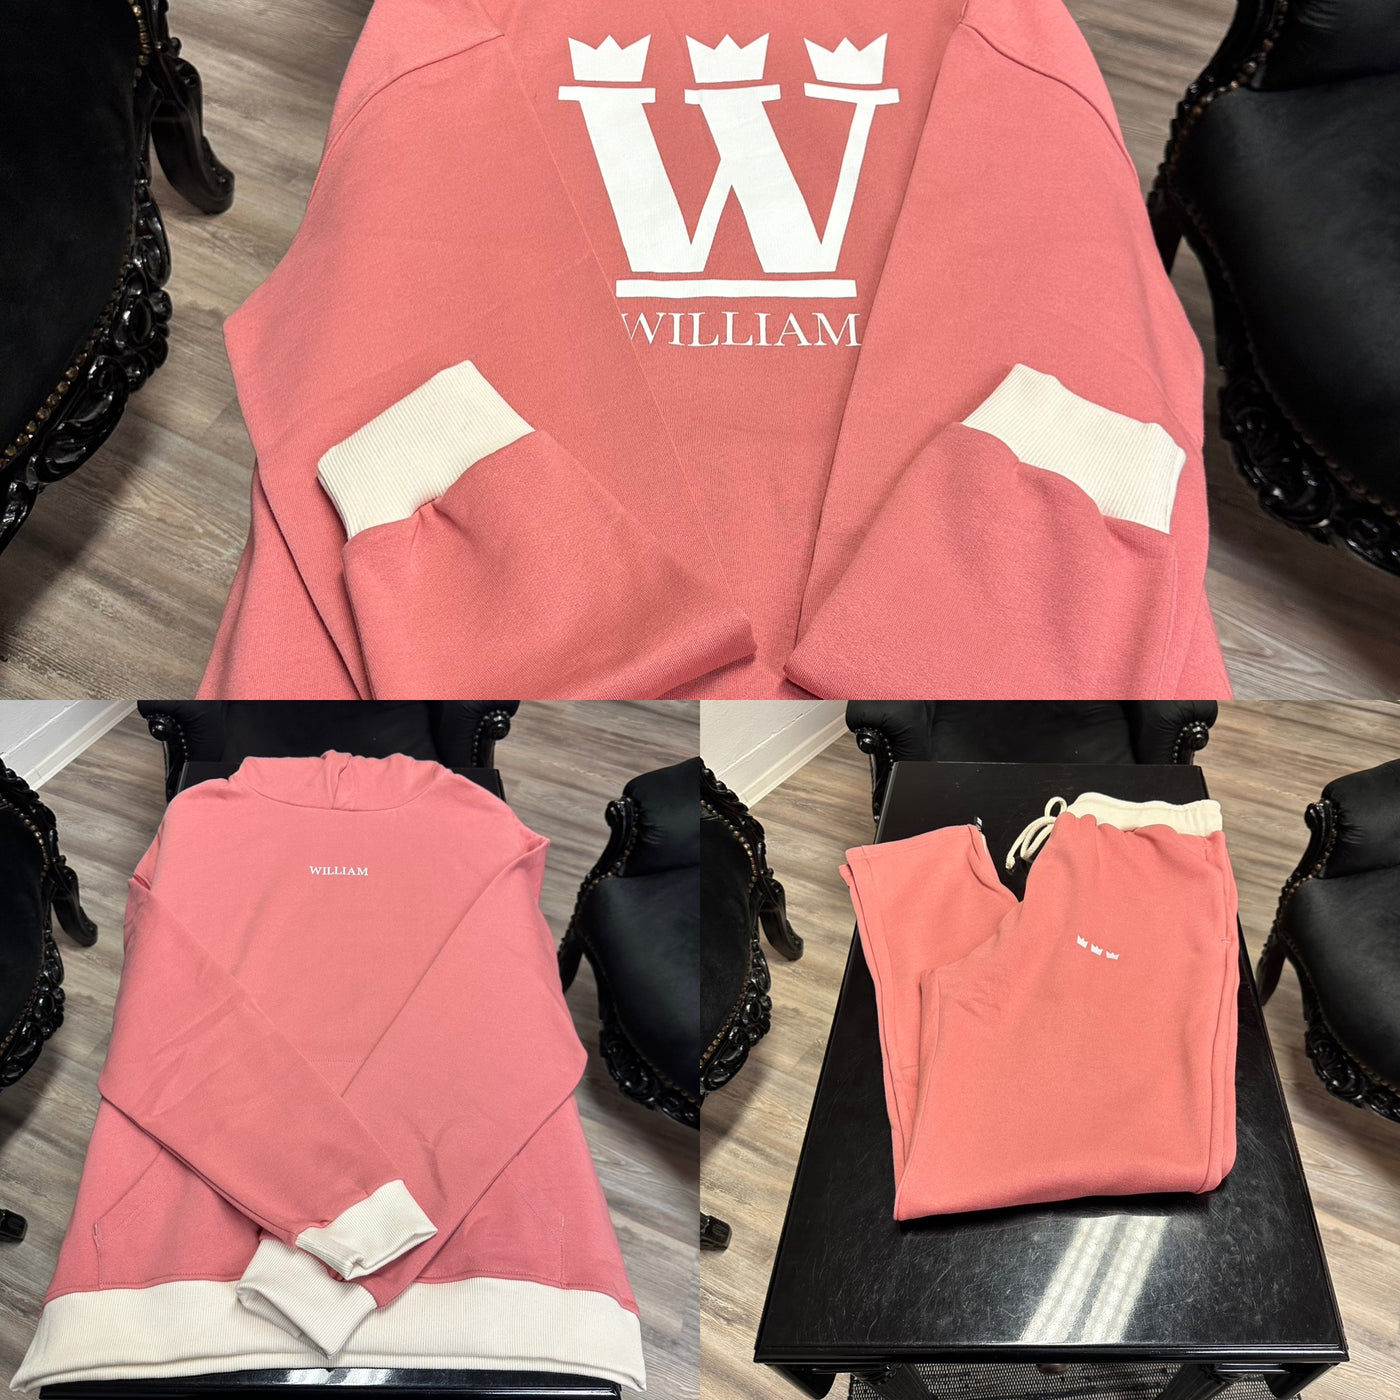 WILLIAM TRACKSUIT PASTELL ROSA LIMITED EDITION